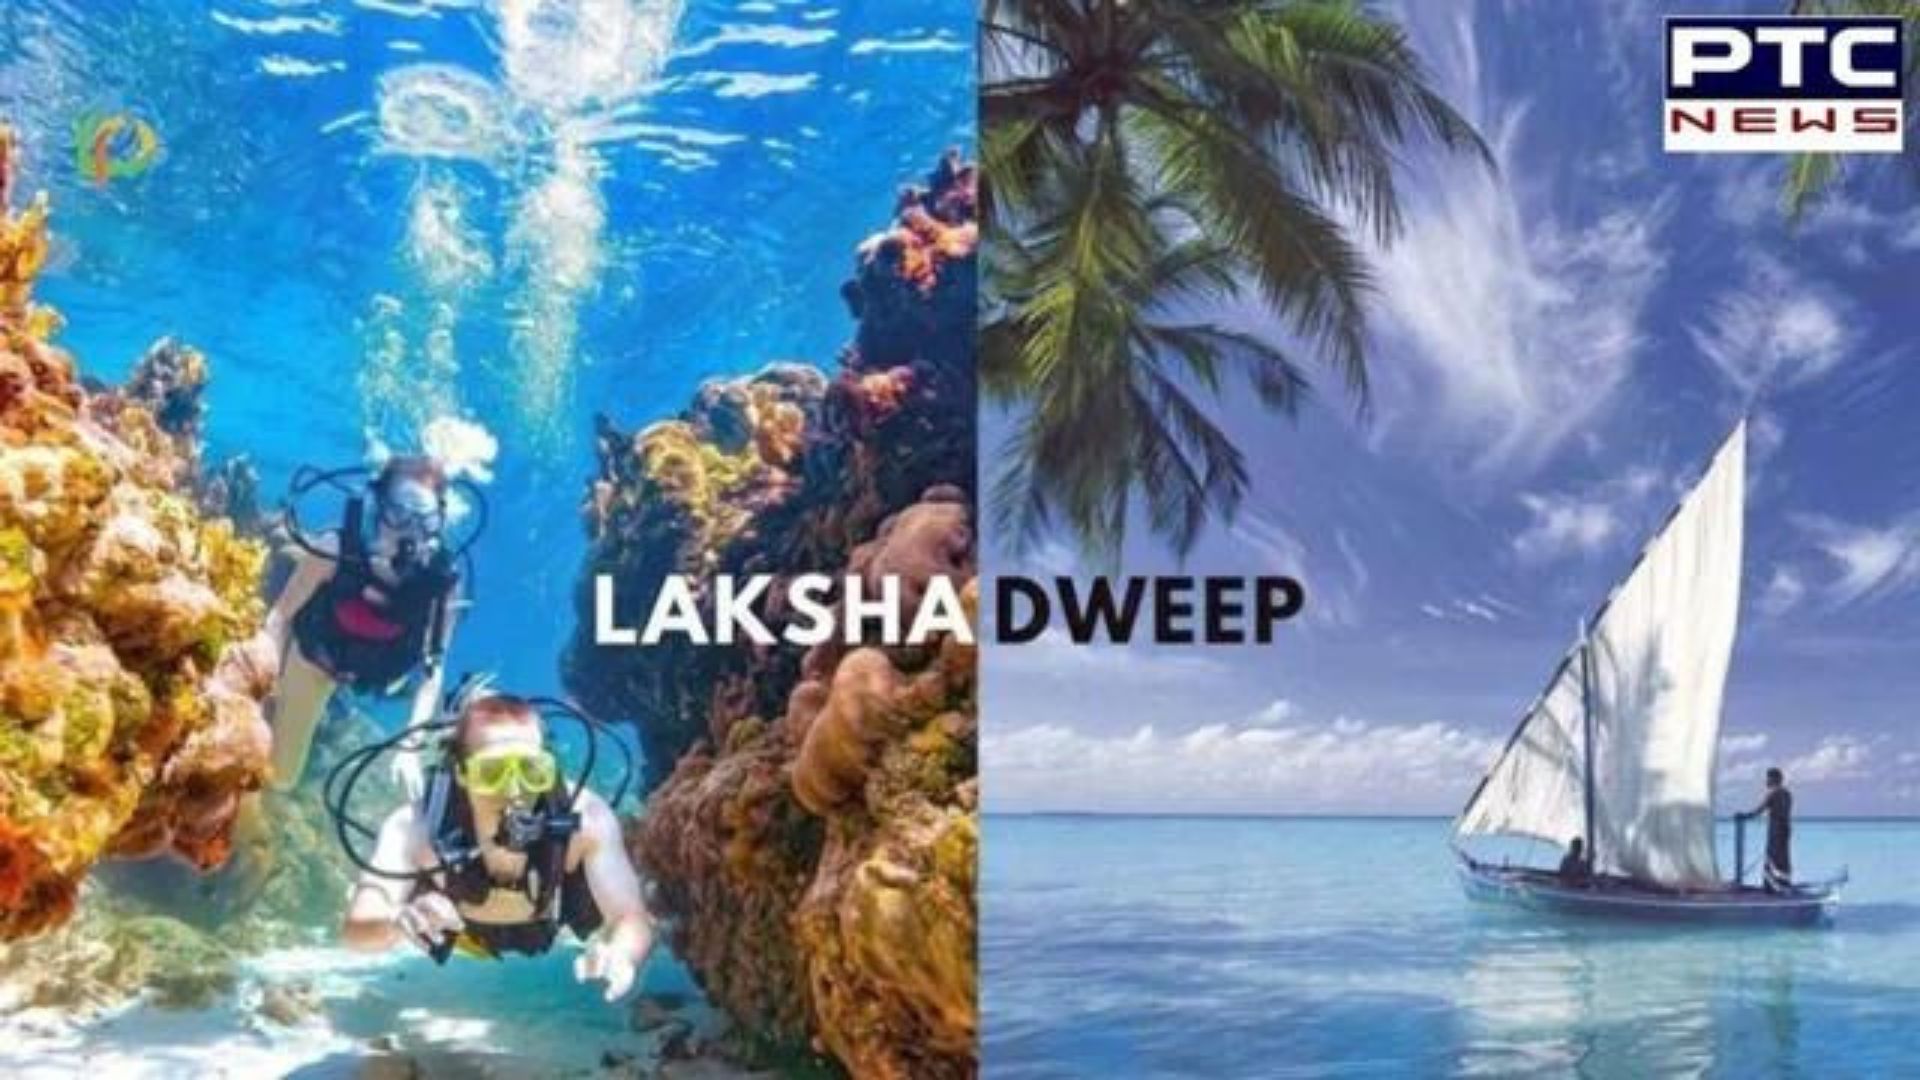 Did you search Lakshadweep? Travel agency observe 3,400 % rise in searches for Lakshadweep